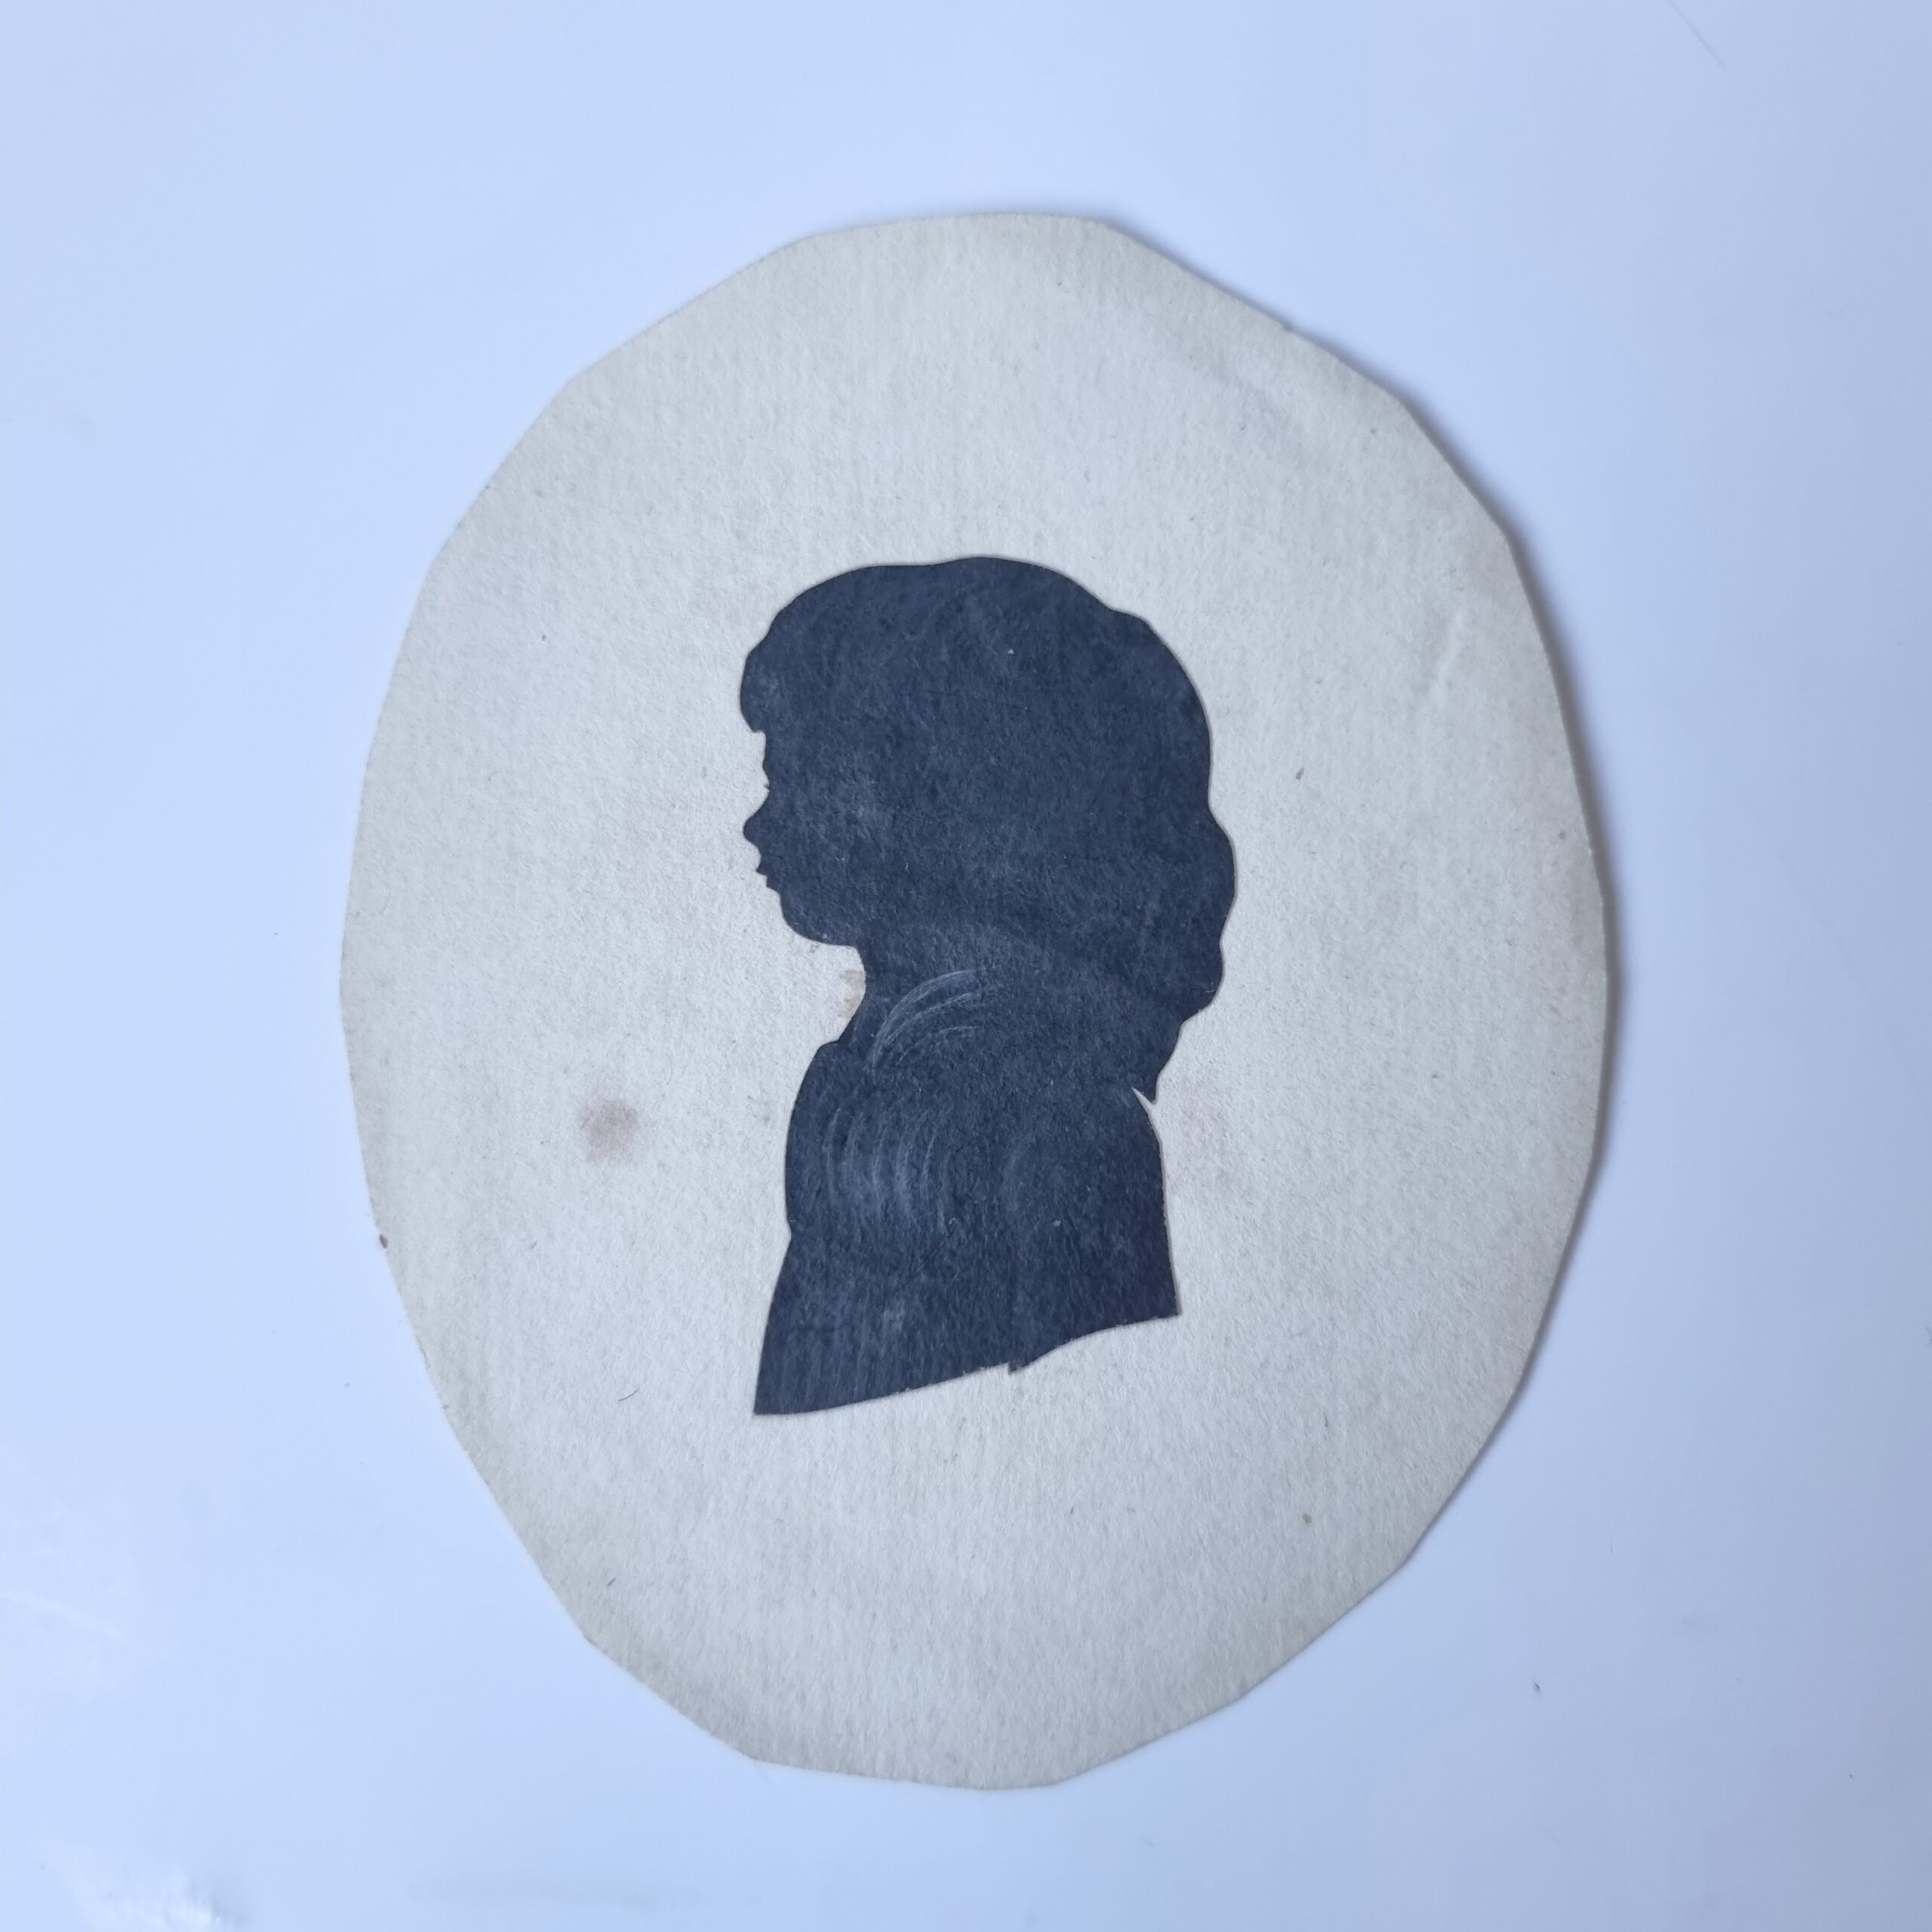 [Silhouette portraits] A man, a young woman and a girl, late 18th / early 19th century.